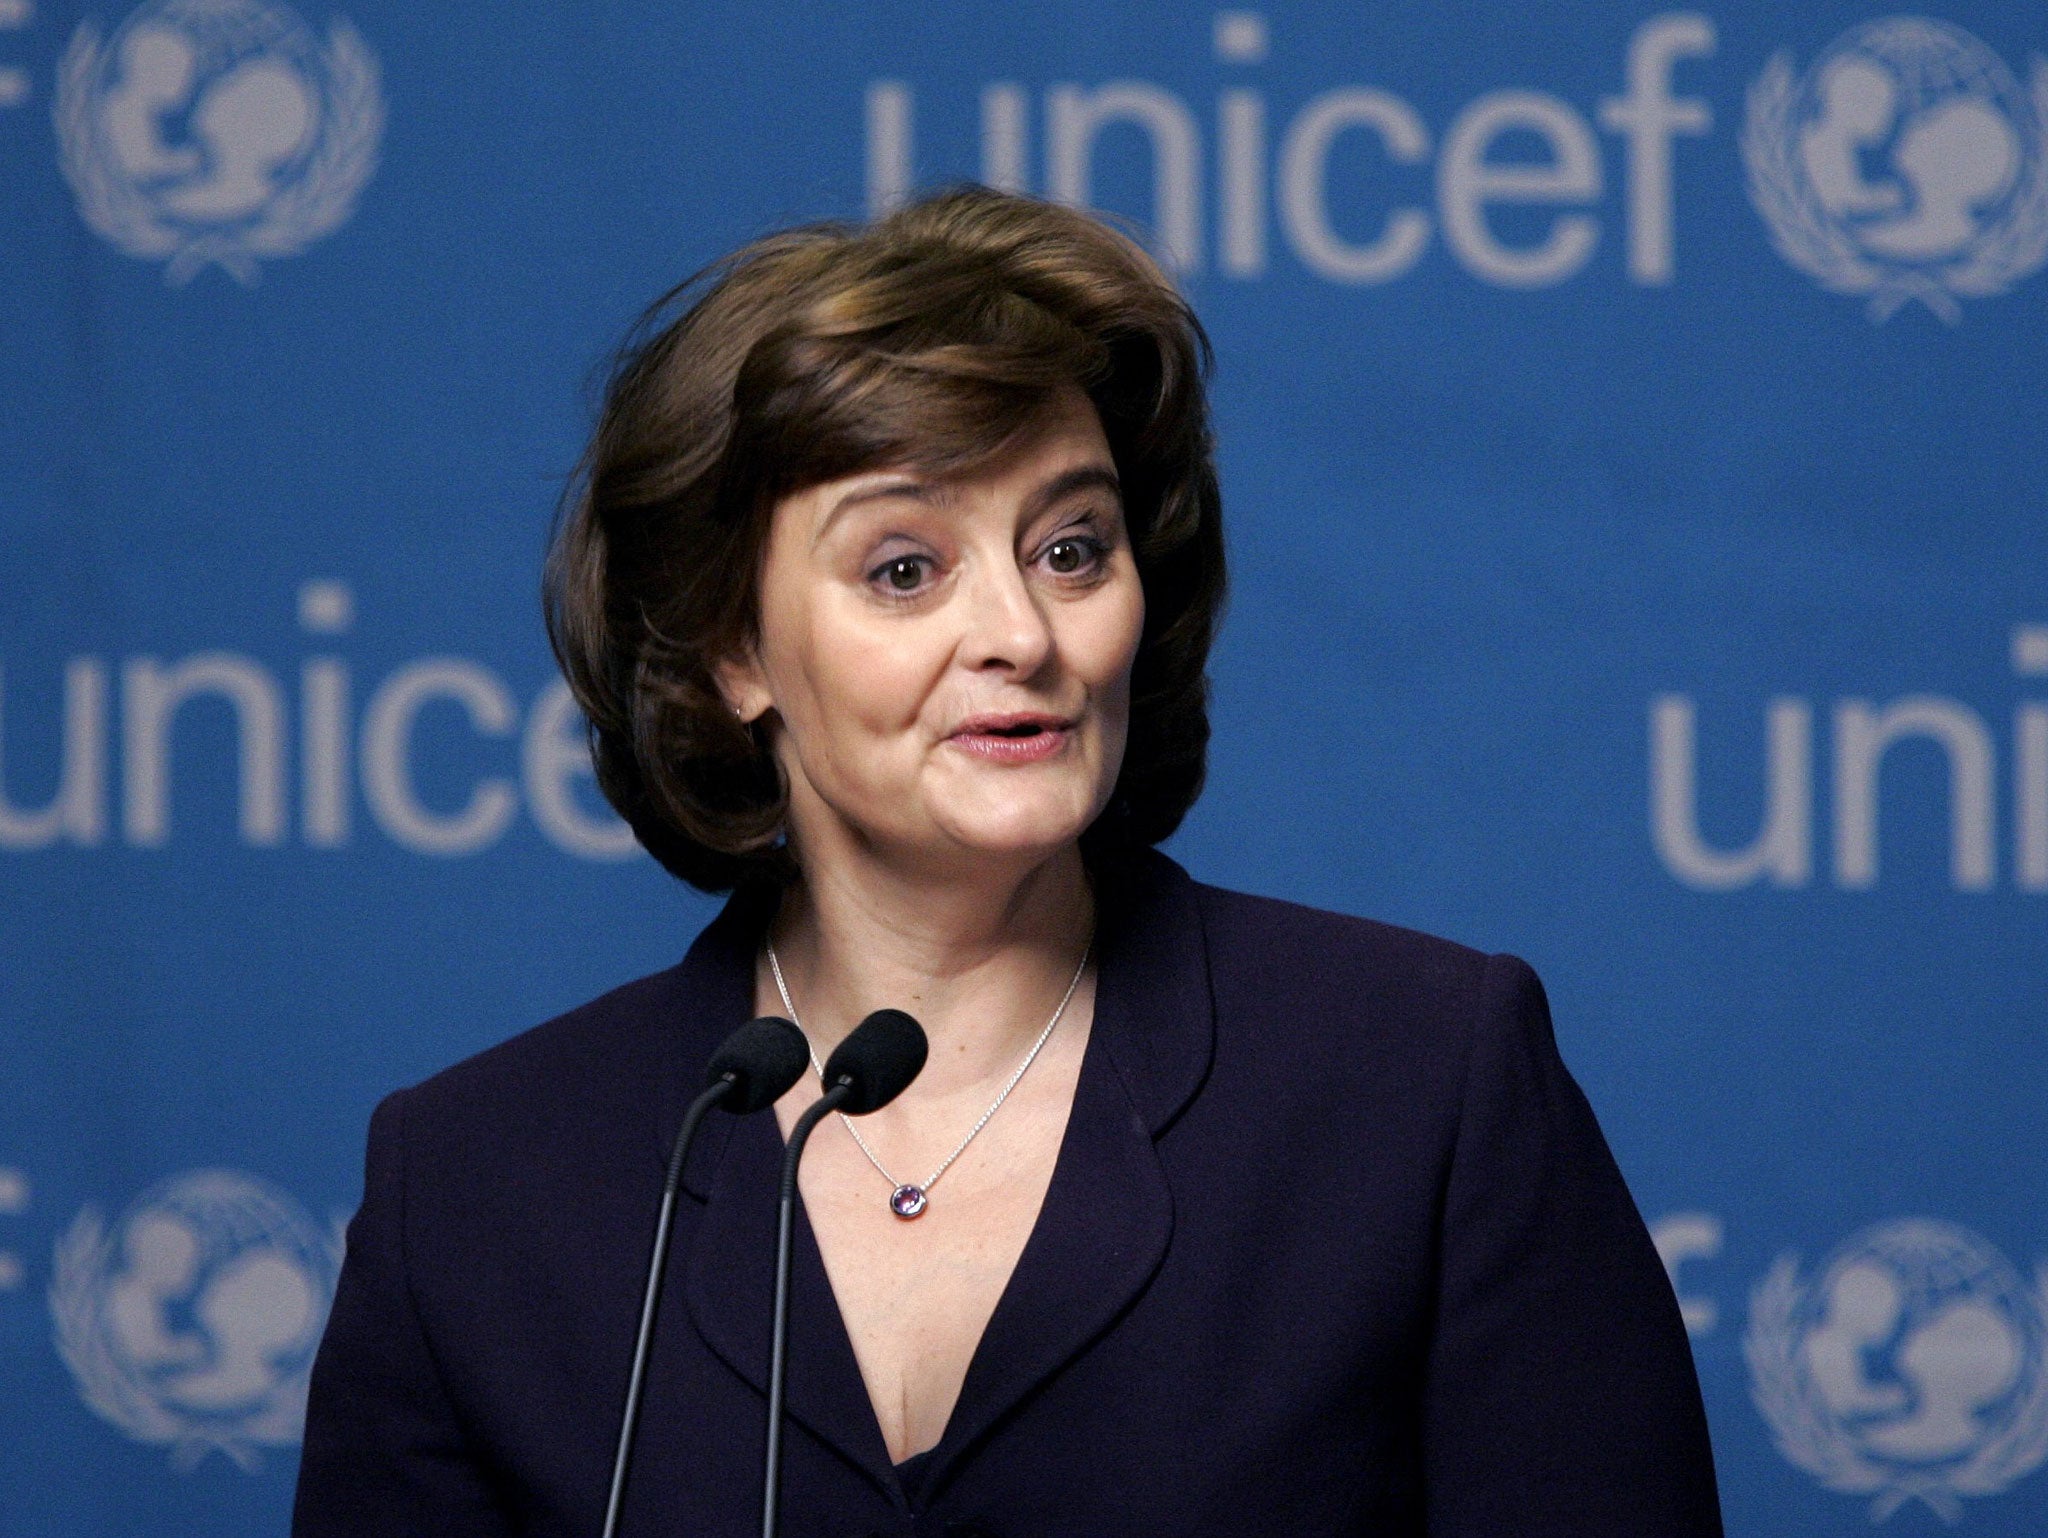 Cherie Blair, wife of former Prime Minister Tony Blair speaking at UNICEF House